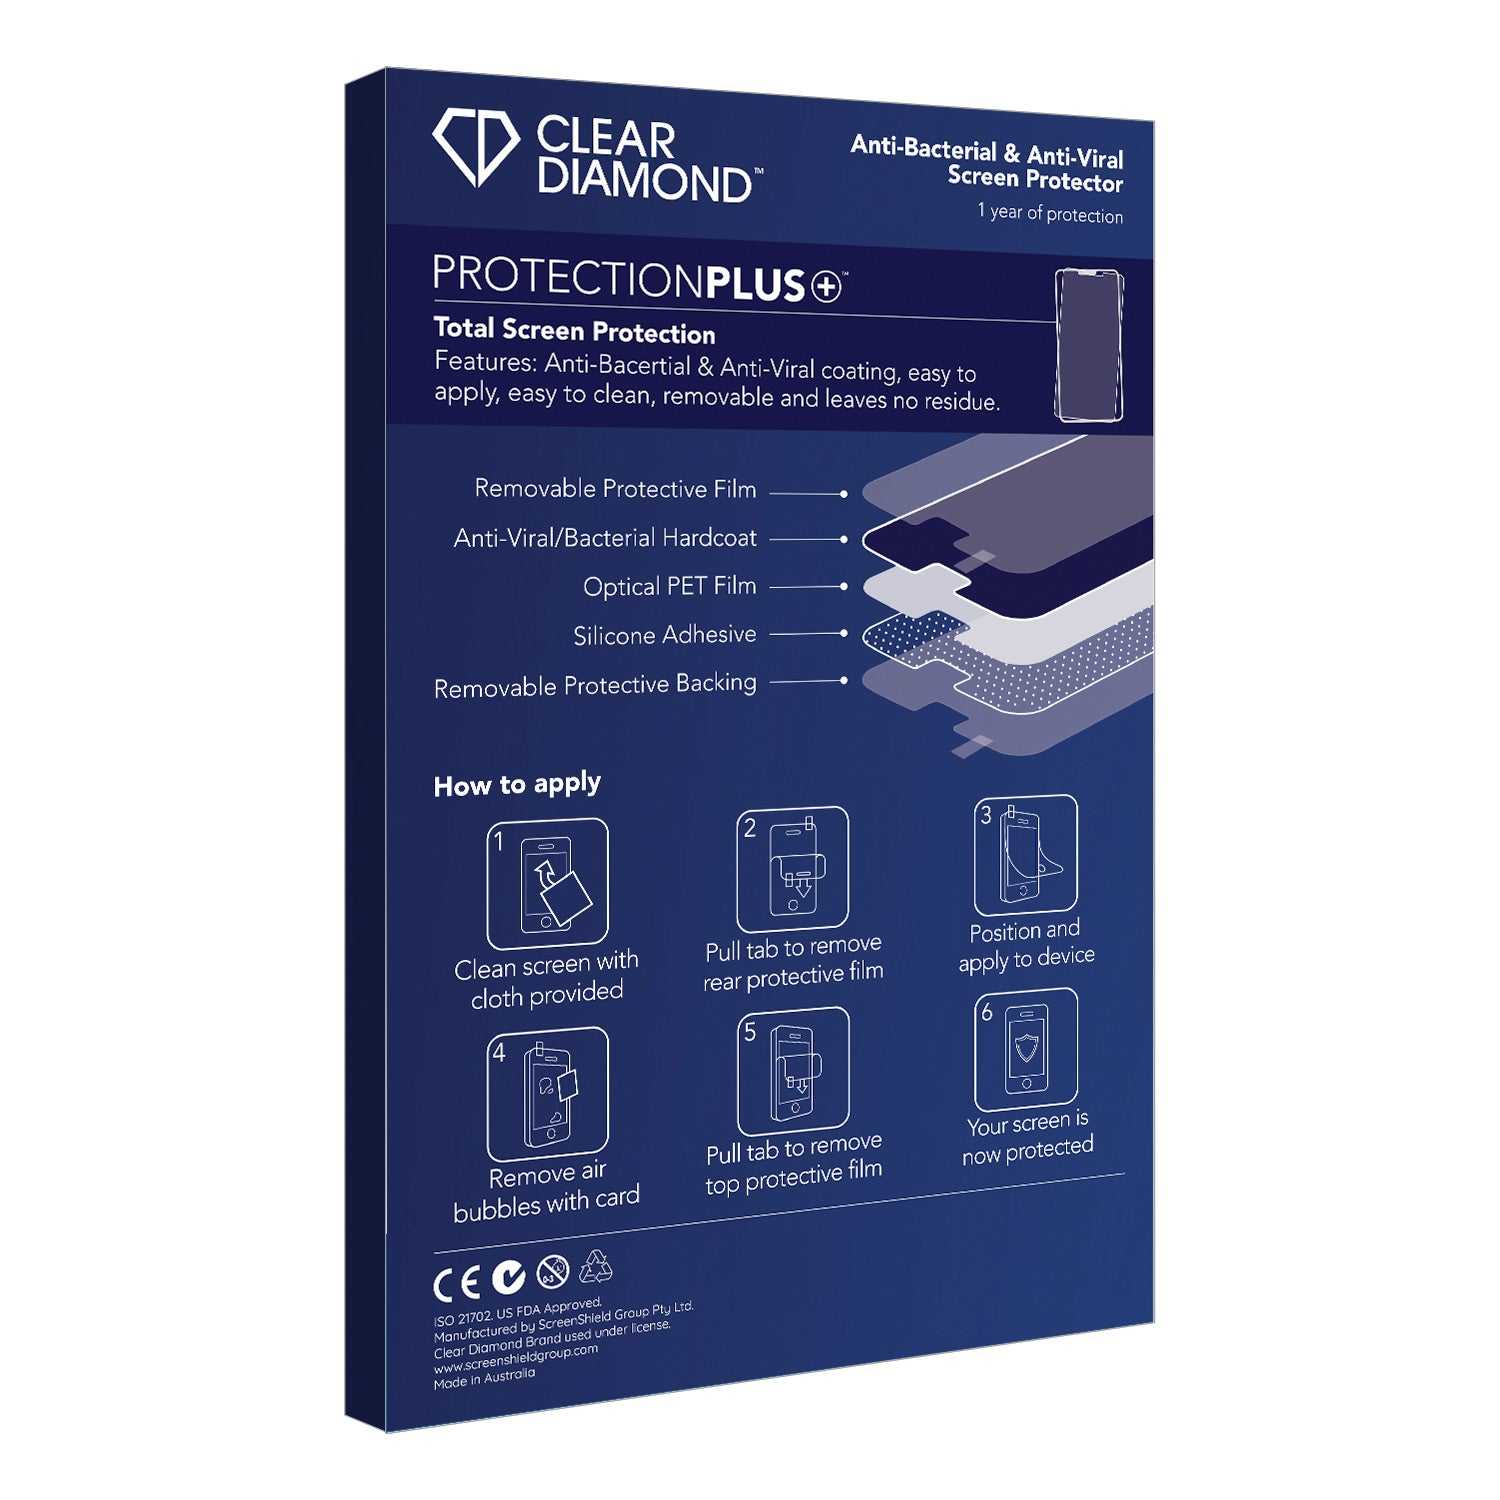 ScreenShield, Clear Diamond Anti-viral Screen Protector for Onyx Boox Note 4